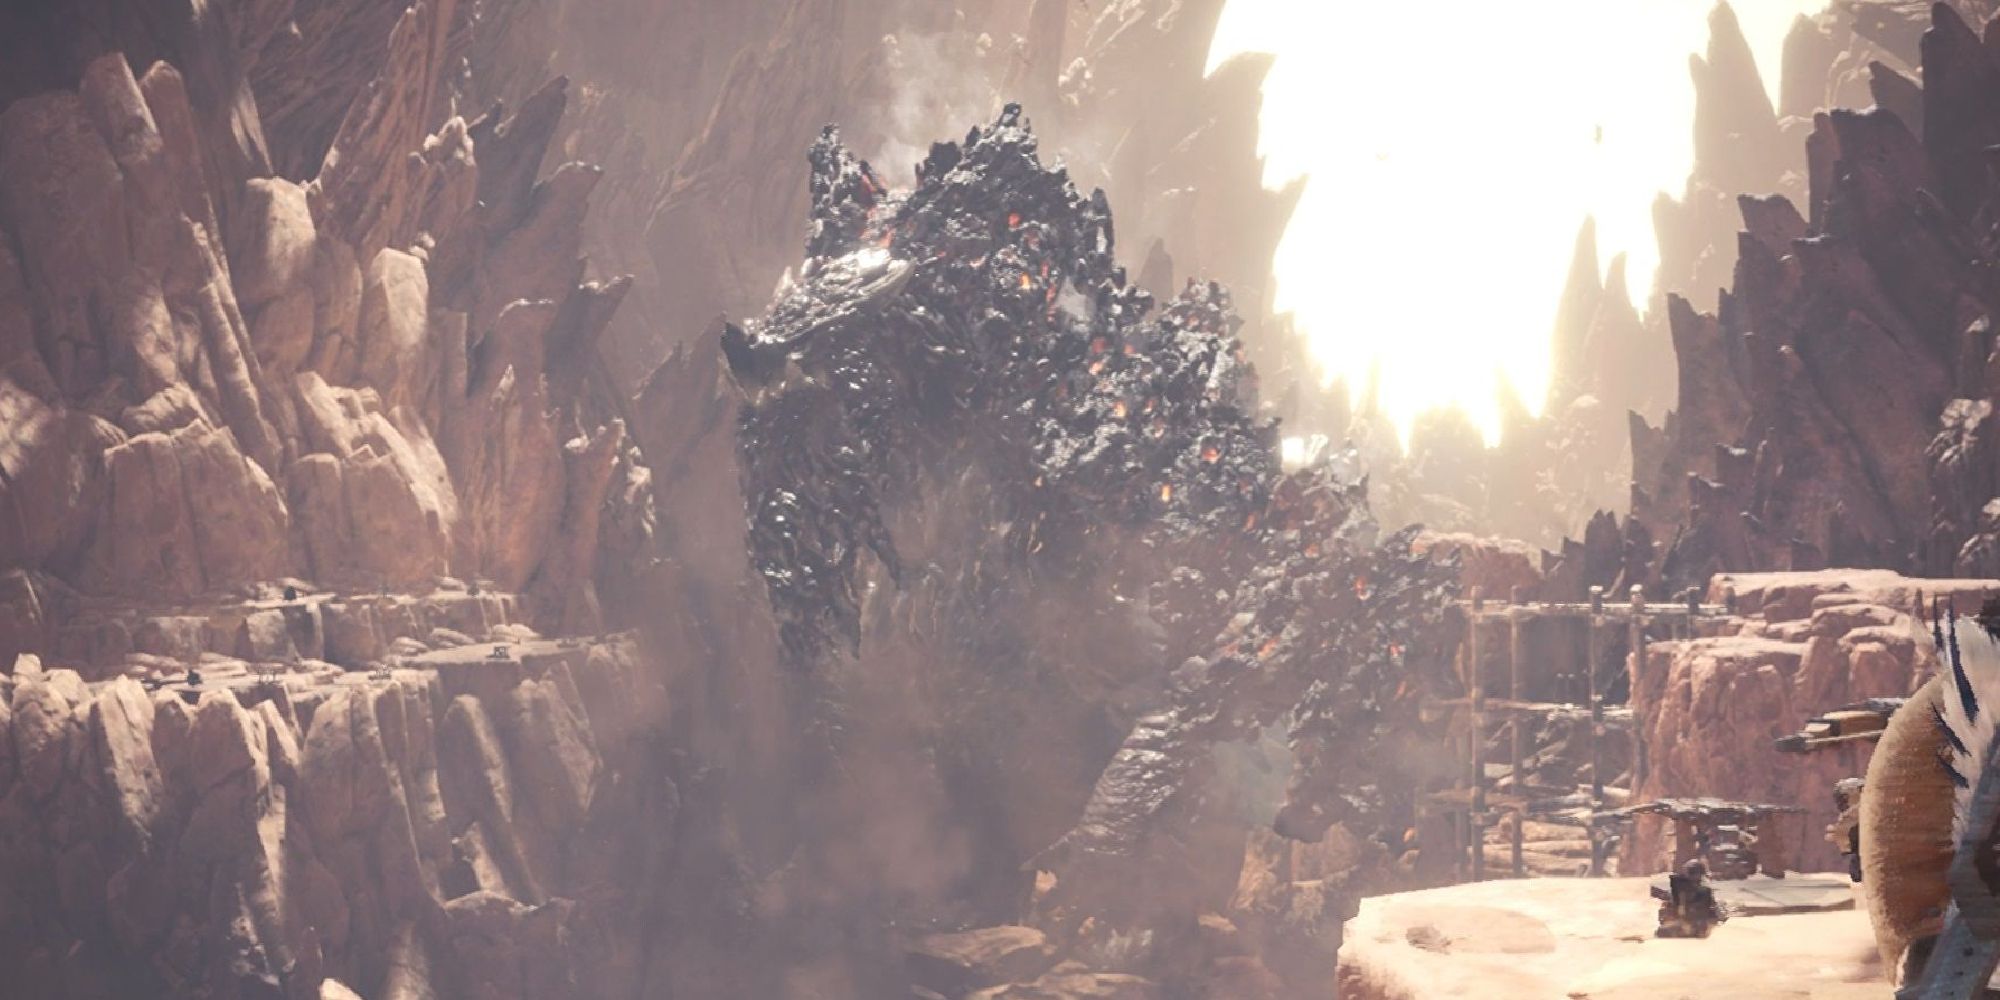 A Zorah Magdoros marching through a canyon while Hunters watch in Monster Hunter World